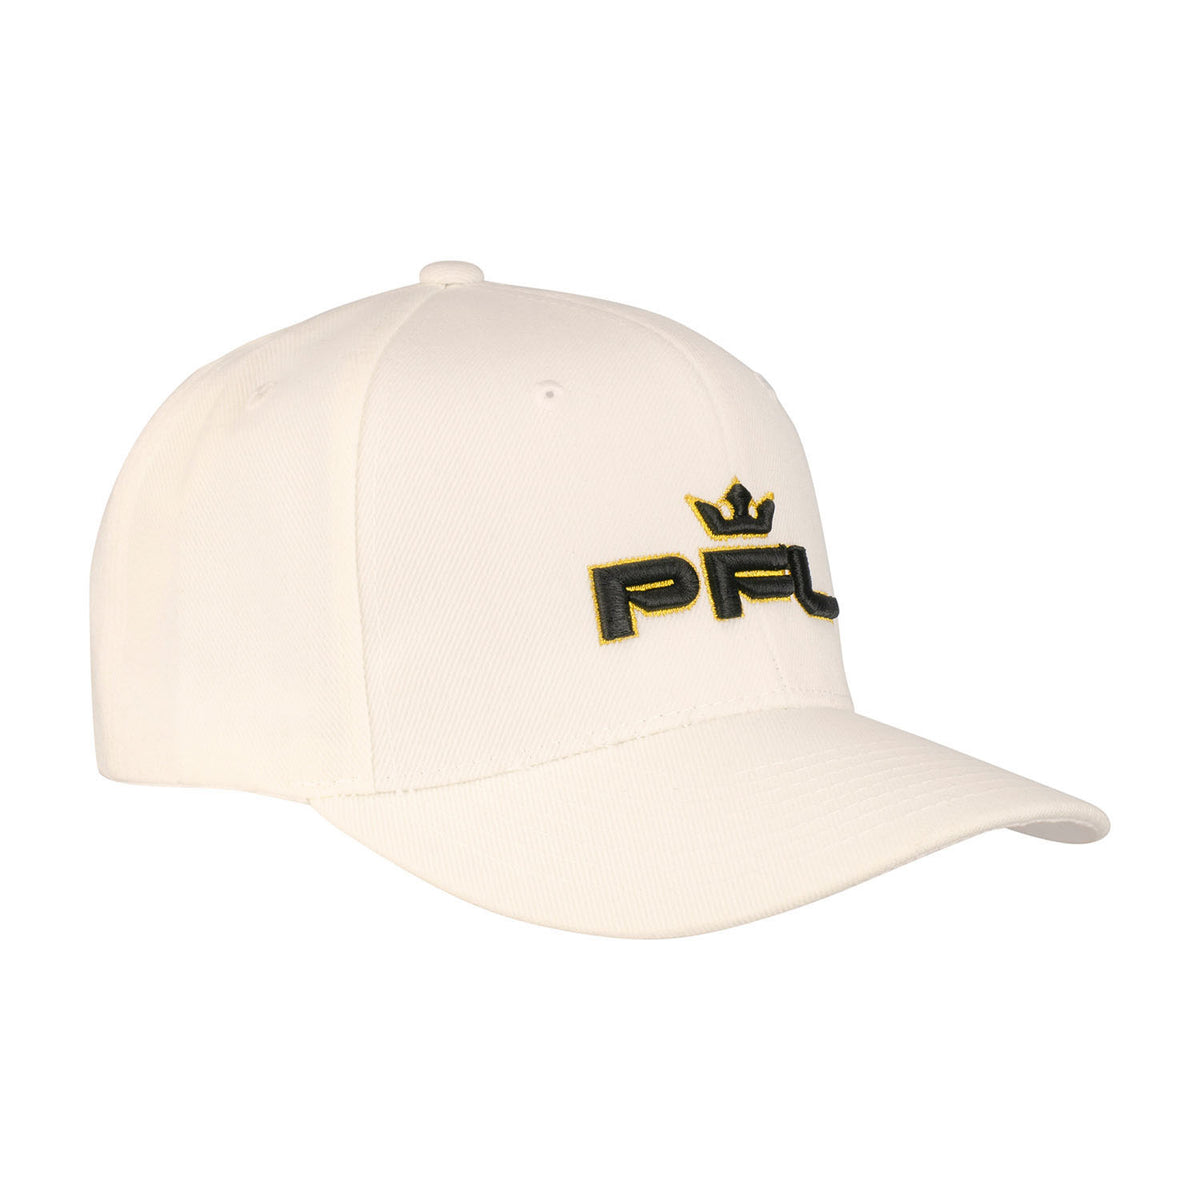 2021 PFL Championship Hat in White - Right Side View